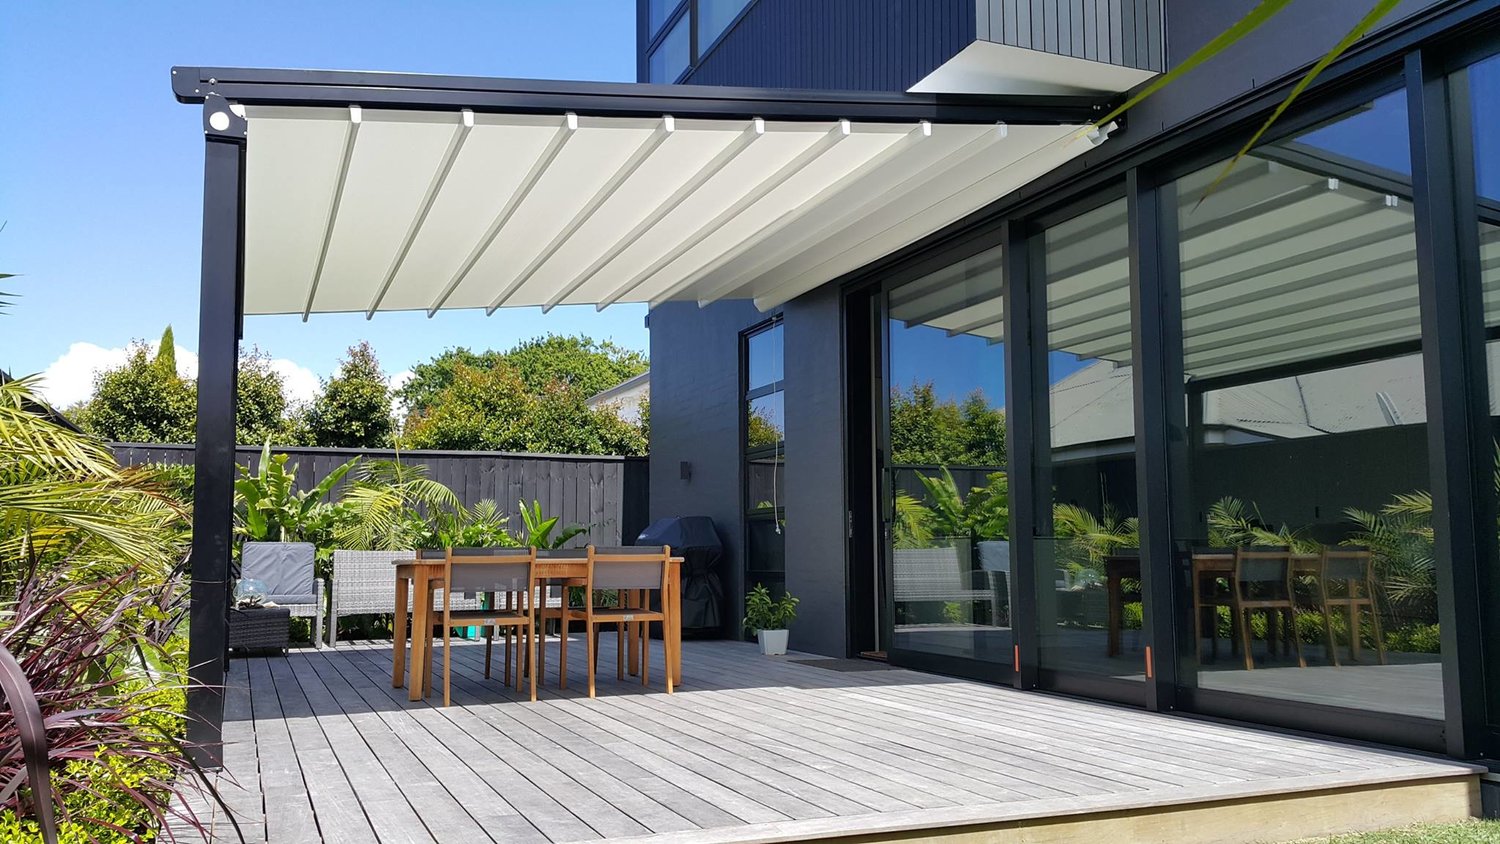 Oztech Retractable Roof Systems Nz, Patio Roofing Options Nz